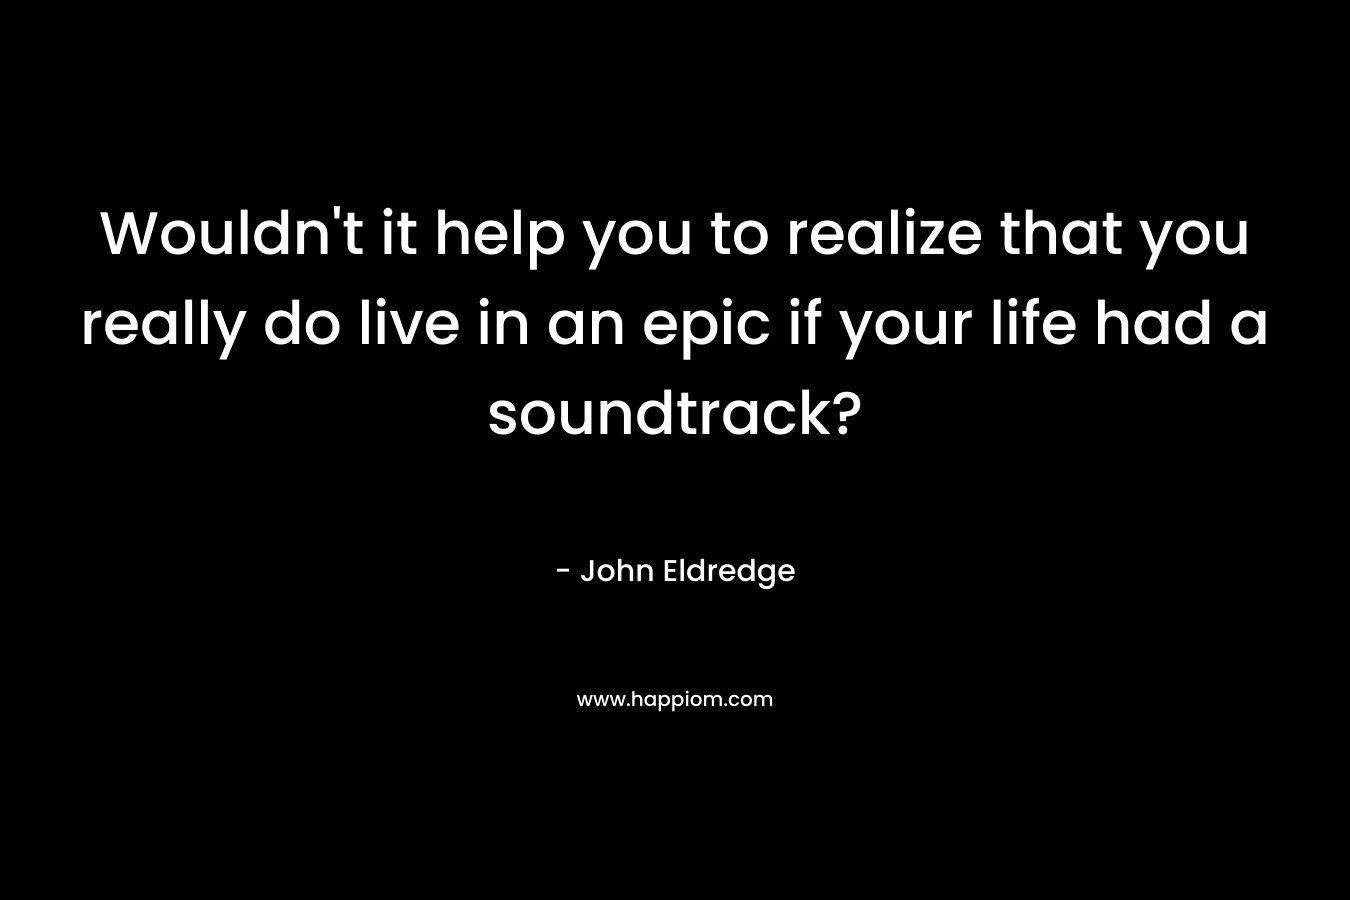 Wouldn’t it help you to realize that you really do live in an epic if your life had a soundtrack? – John Eldredge